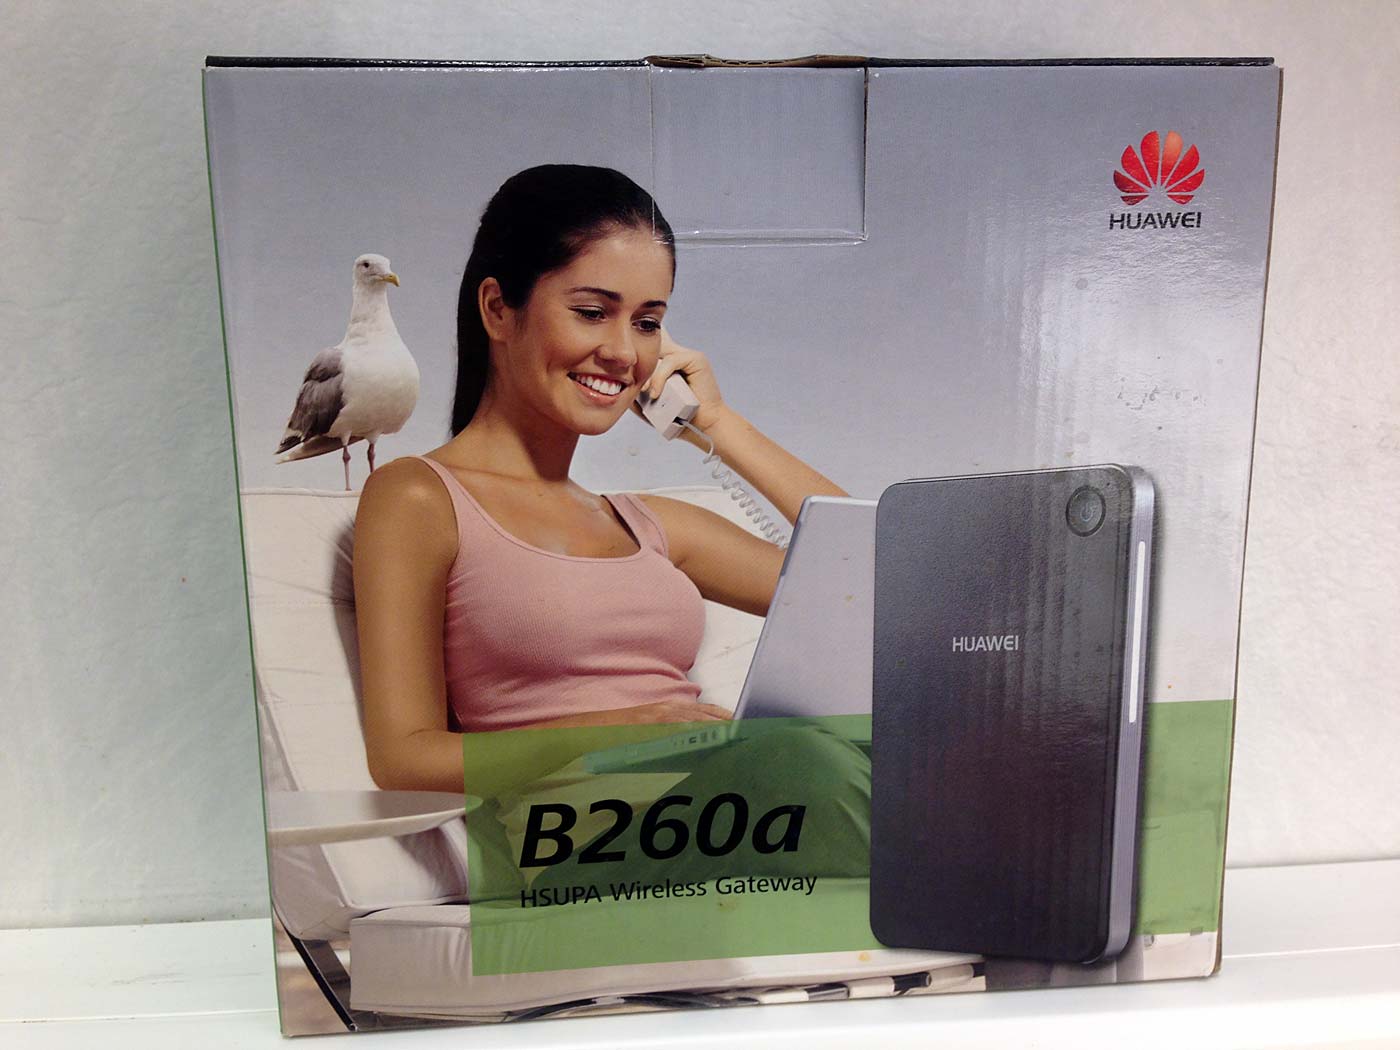 Djúpavík. And Trékyllisvík. I. - Ok, somewthing completely different: In the kitchen we found this box for W-LAN-Router. And we wondered why a sea bird stands behind the woman?! A bird on the cover picture of a box for a router - does not match well. But the bird makes the pictures interesting again! (11 October 2013)